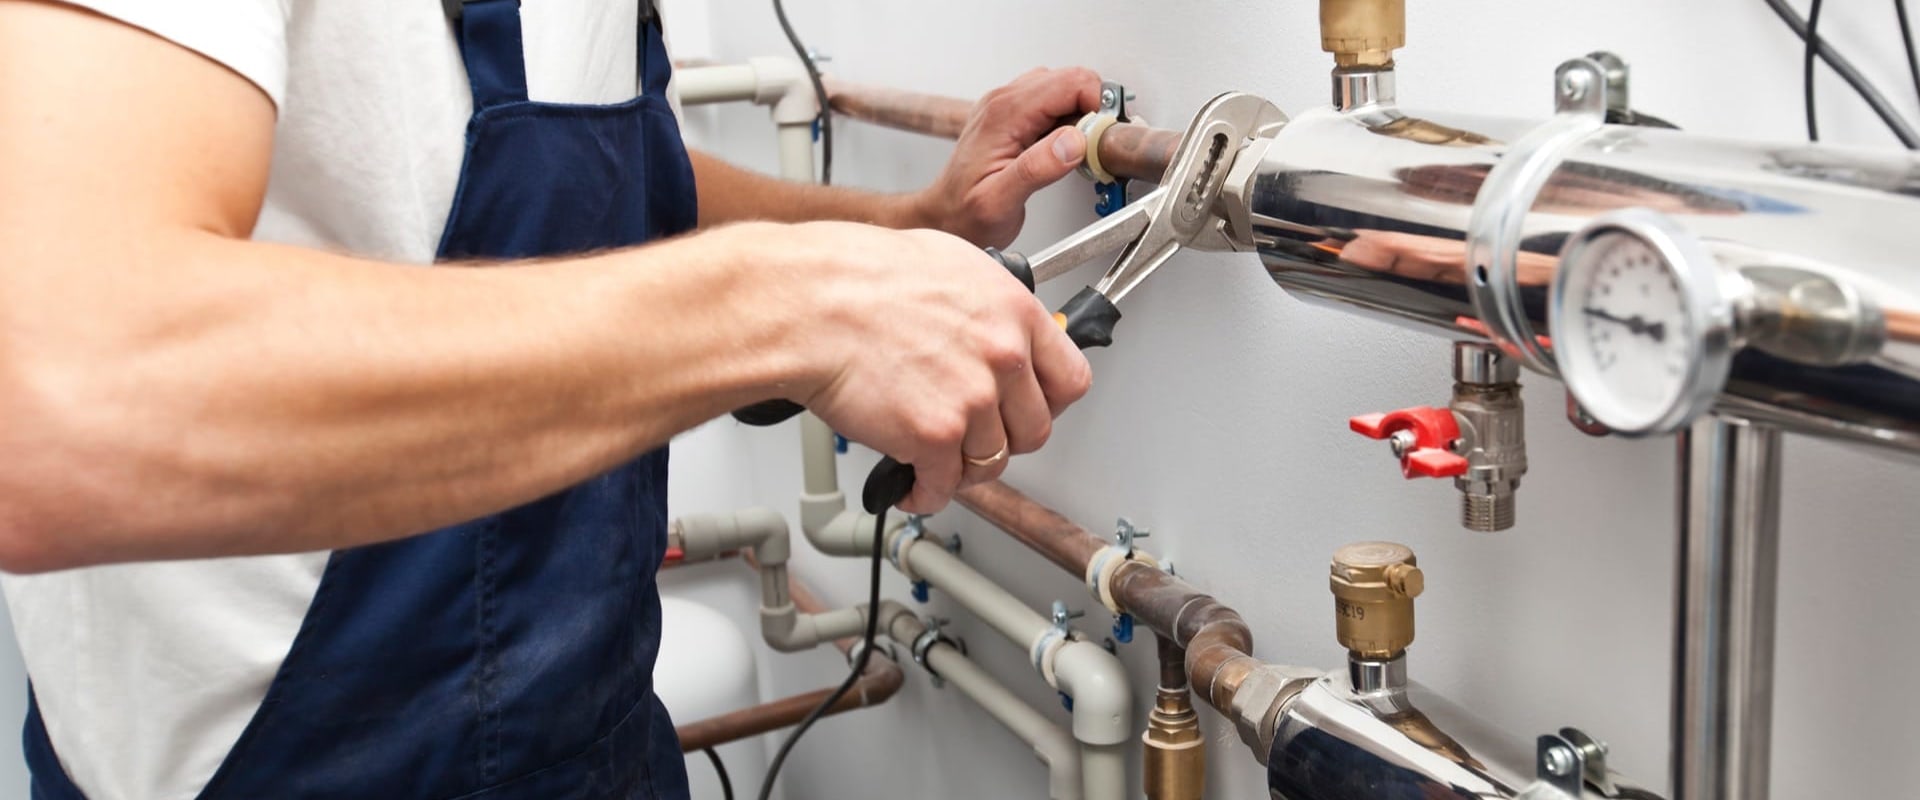 10 Common HVAC Problems and How to Fix Them: An Expert's Perspective